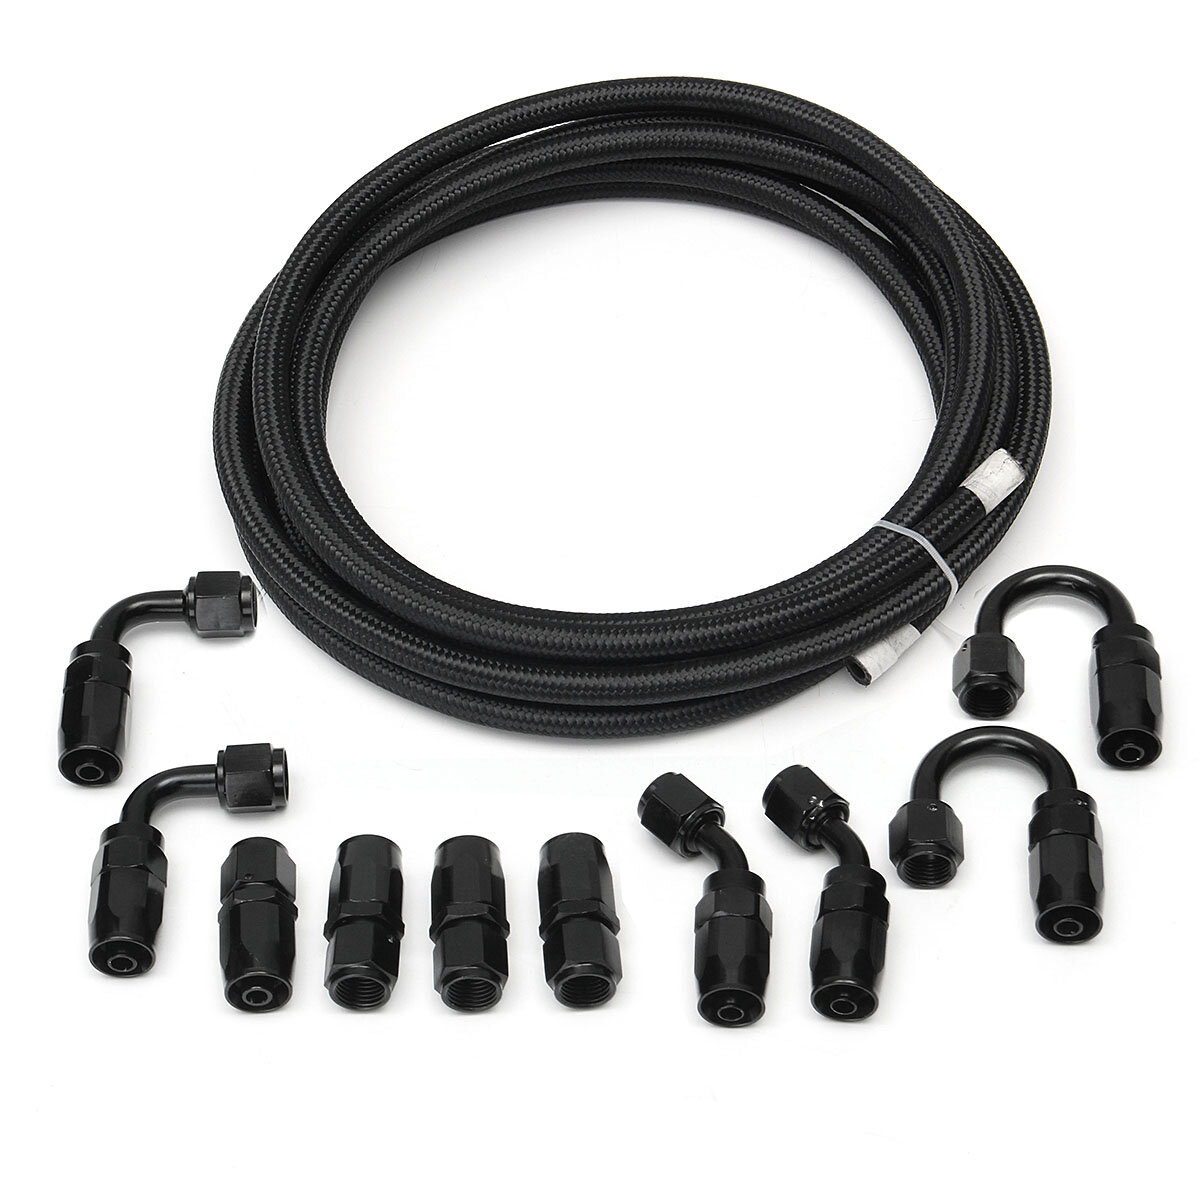 5m an10-10an nylon stainless steel braided fuel hose end adapter kit oil line